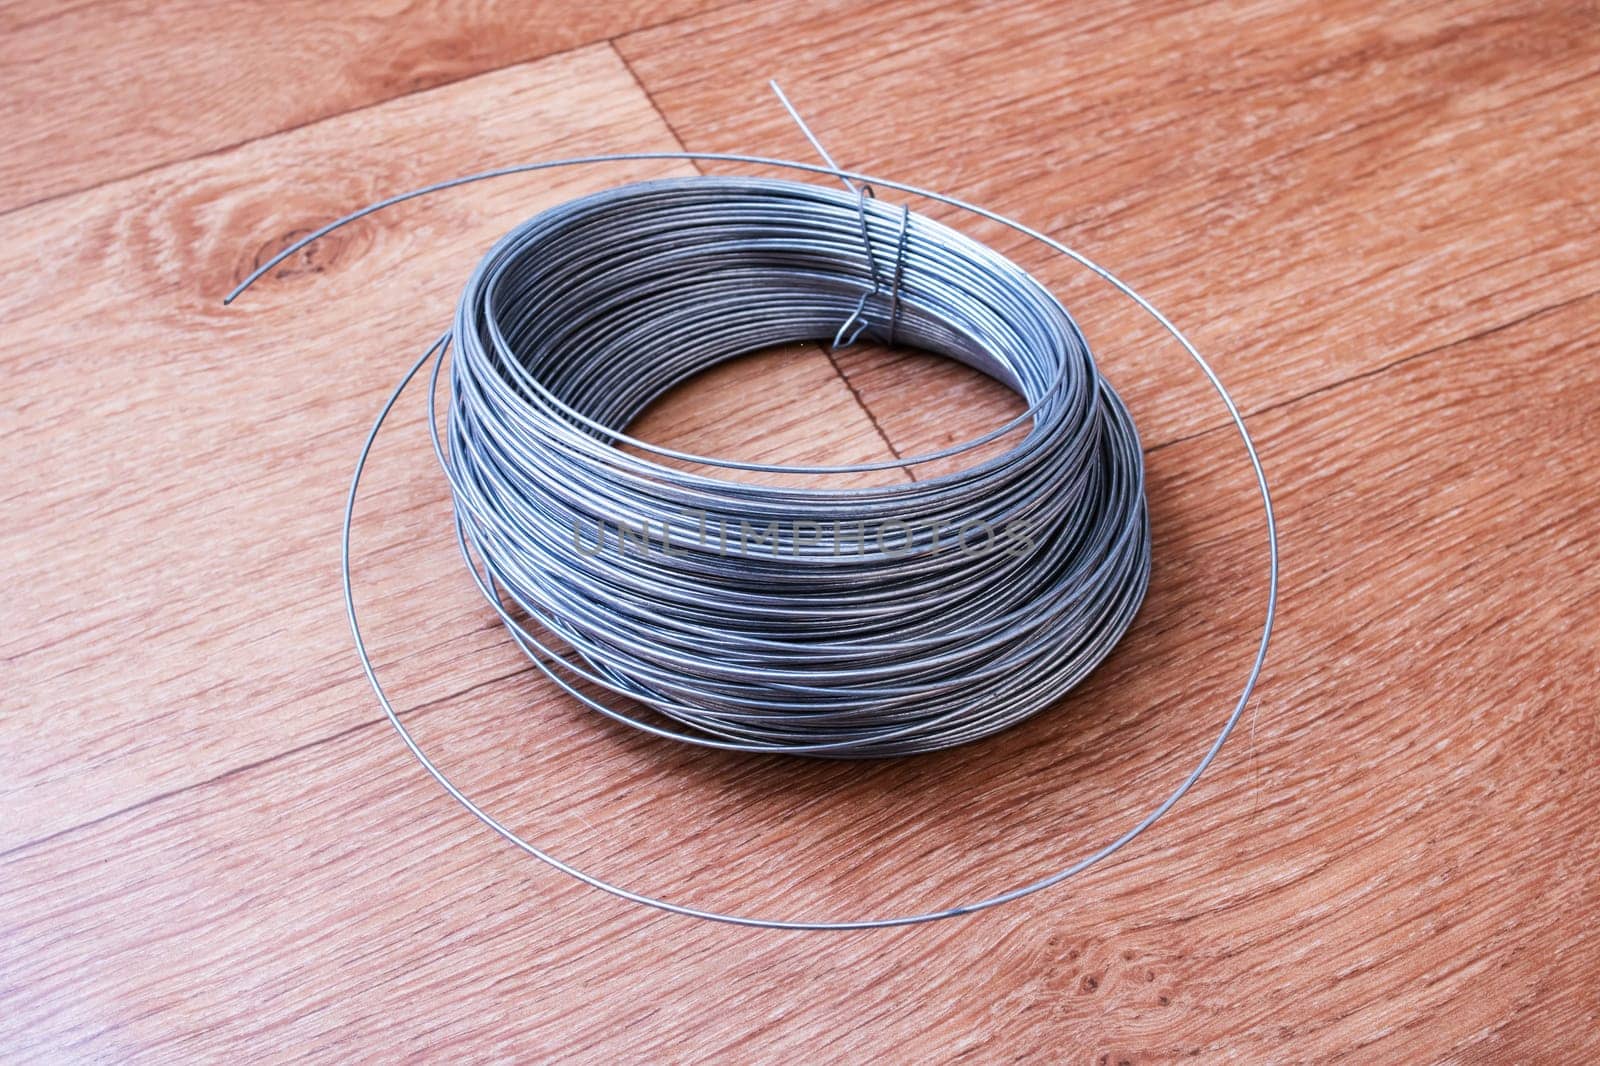 Large coil of wire on the table by Vera1703